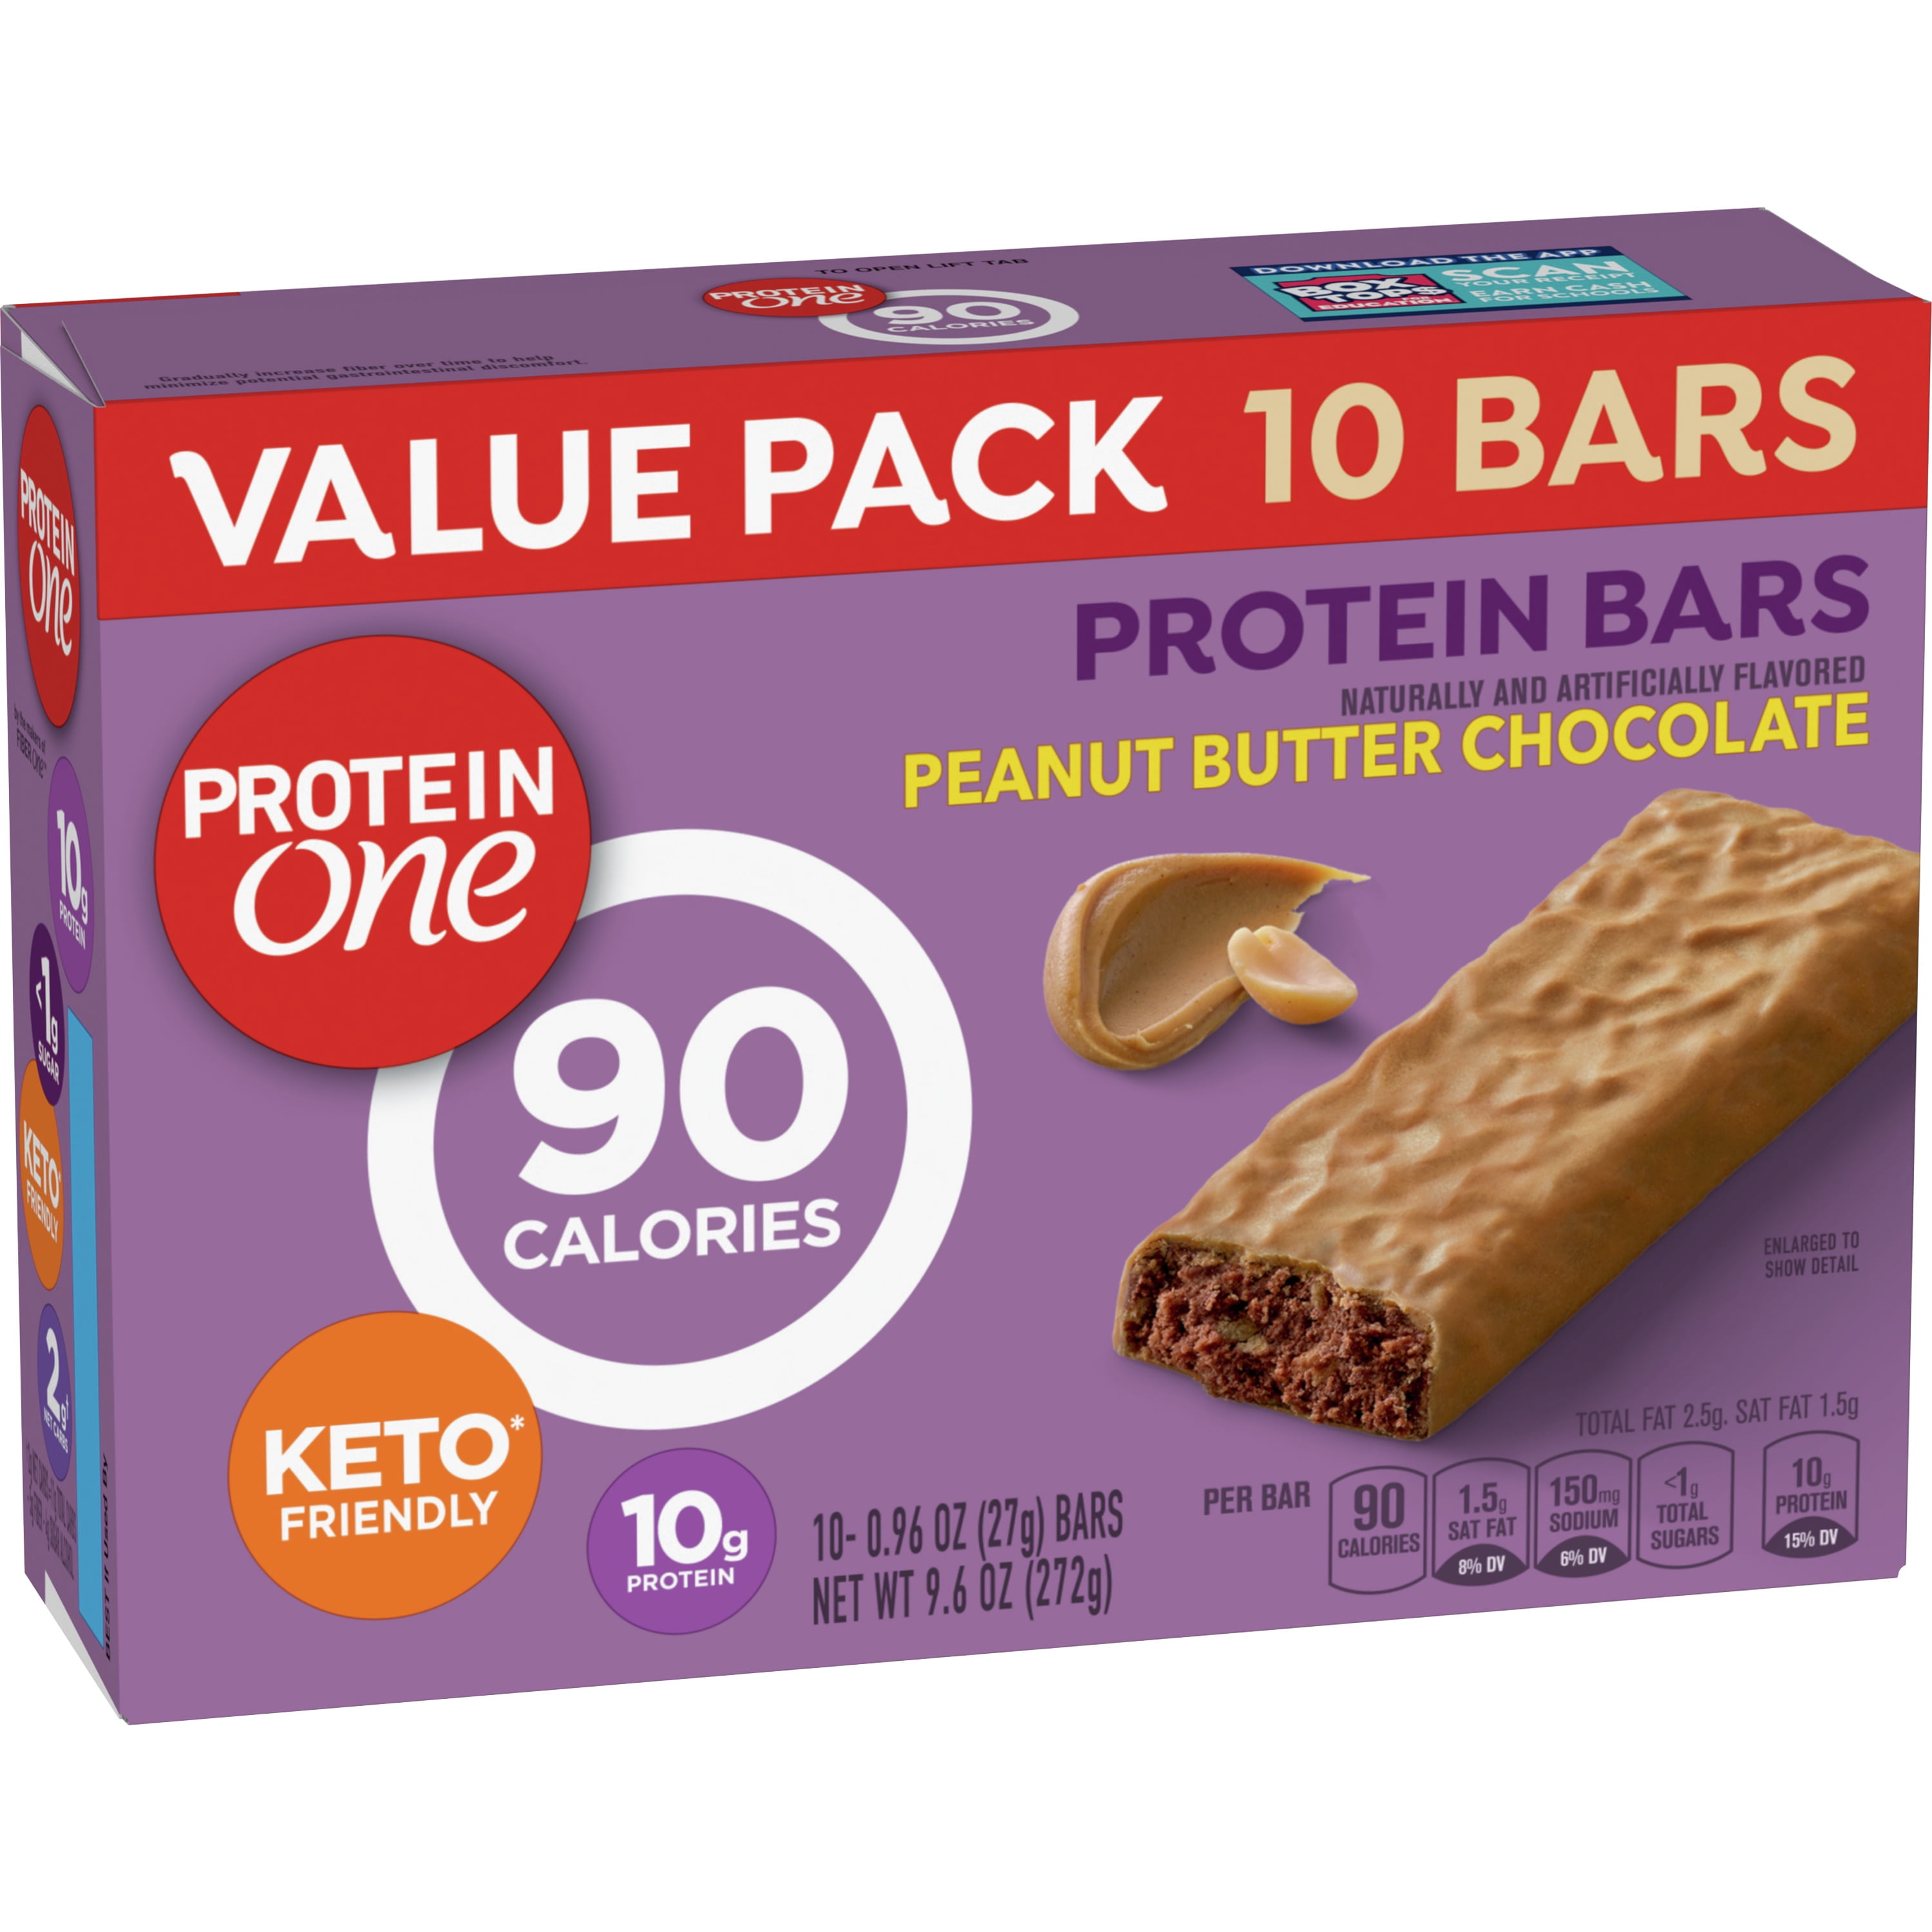 Discounted protein bars